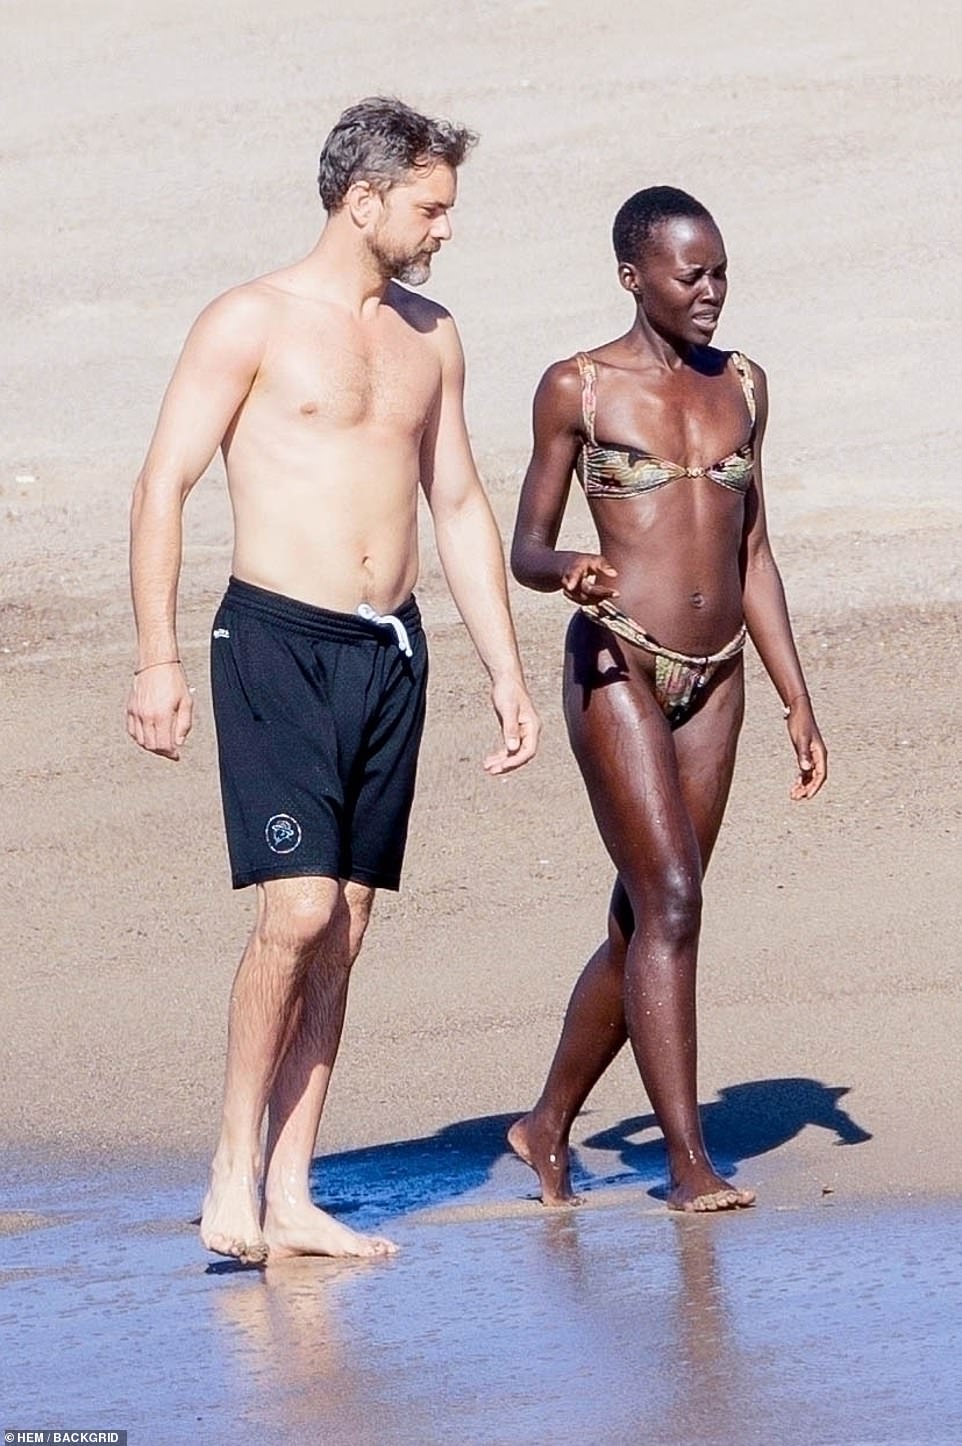 Lupita was dressed in a skimpy printed thong bikini, showing off her slim and fit figure.